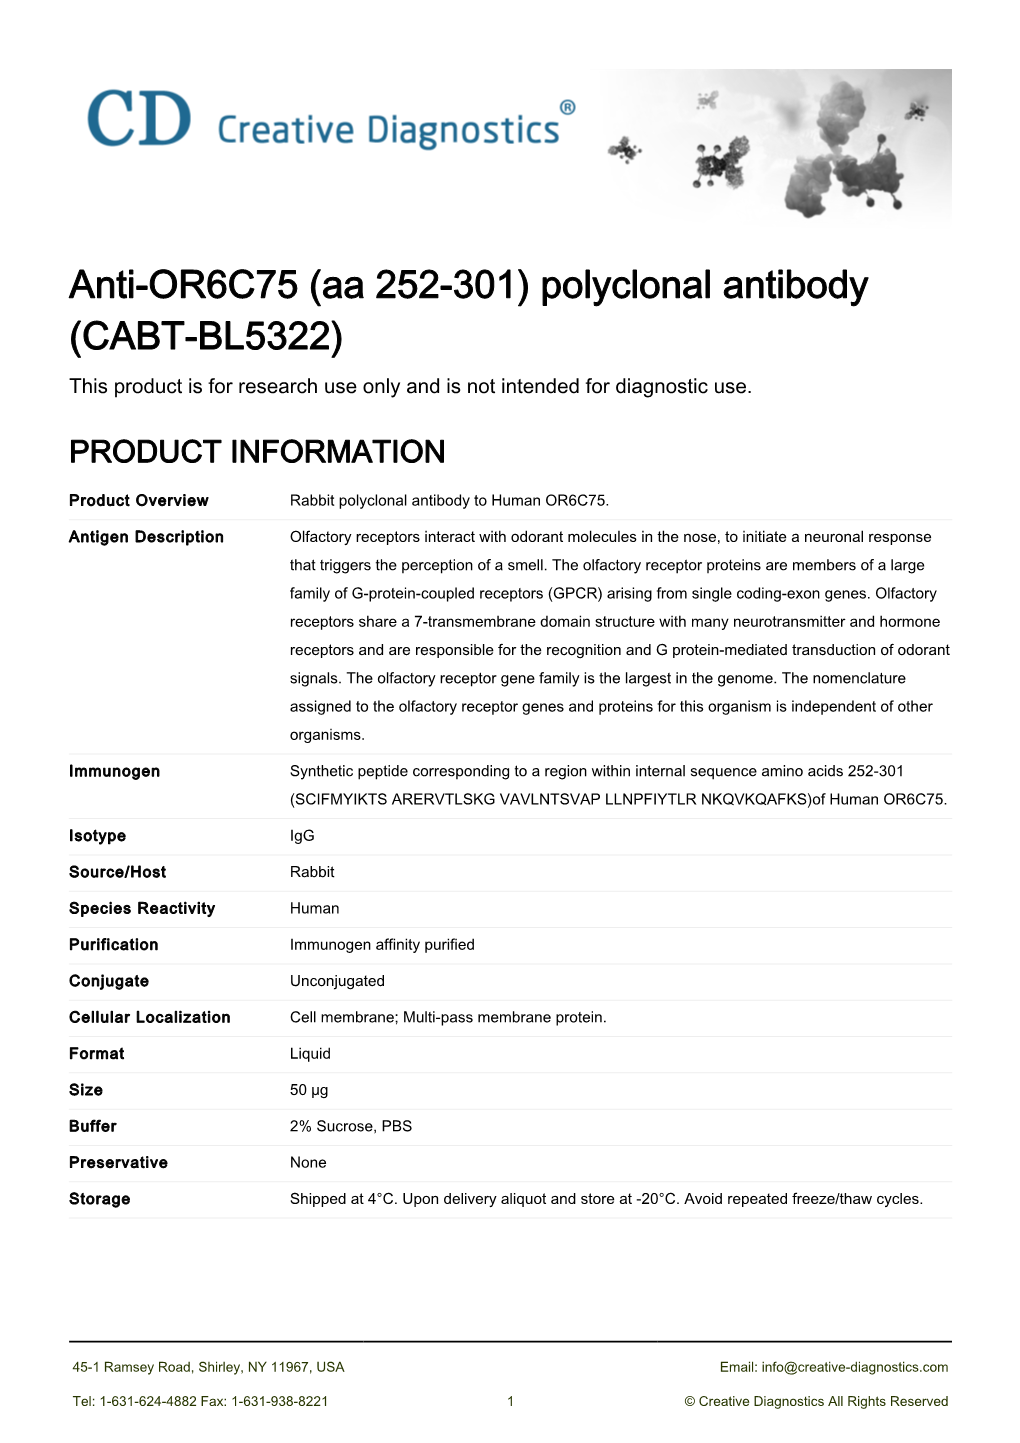 Anti-OR6C75 (Aa 252-301) Polyclonal Antibody (CABT-BL5322) This Product Is for Research Use Only and Is Not Intended for Diagnostic Use